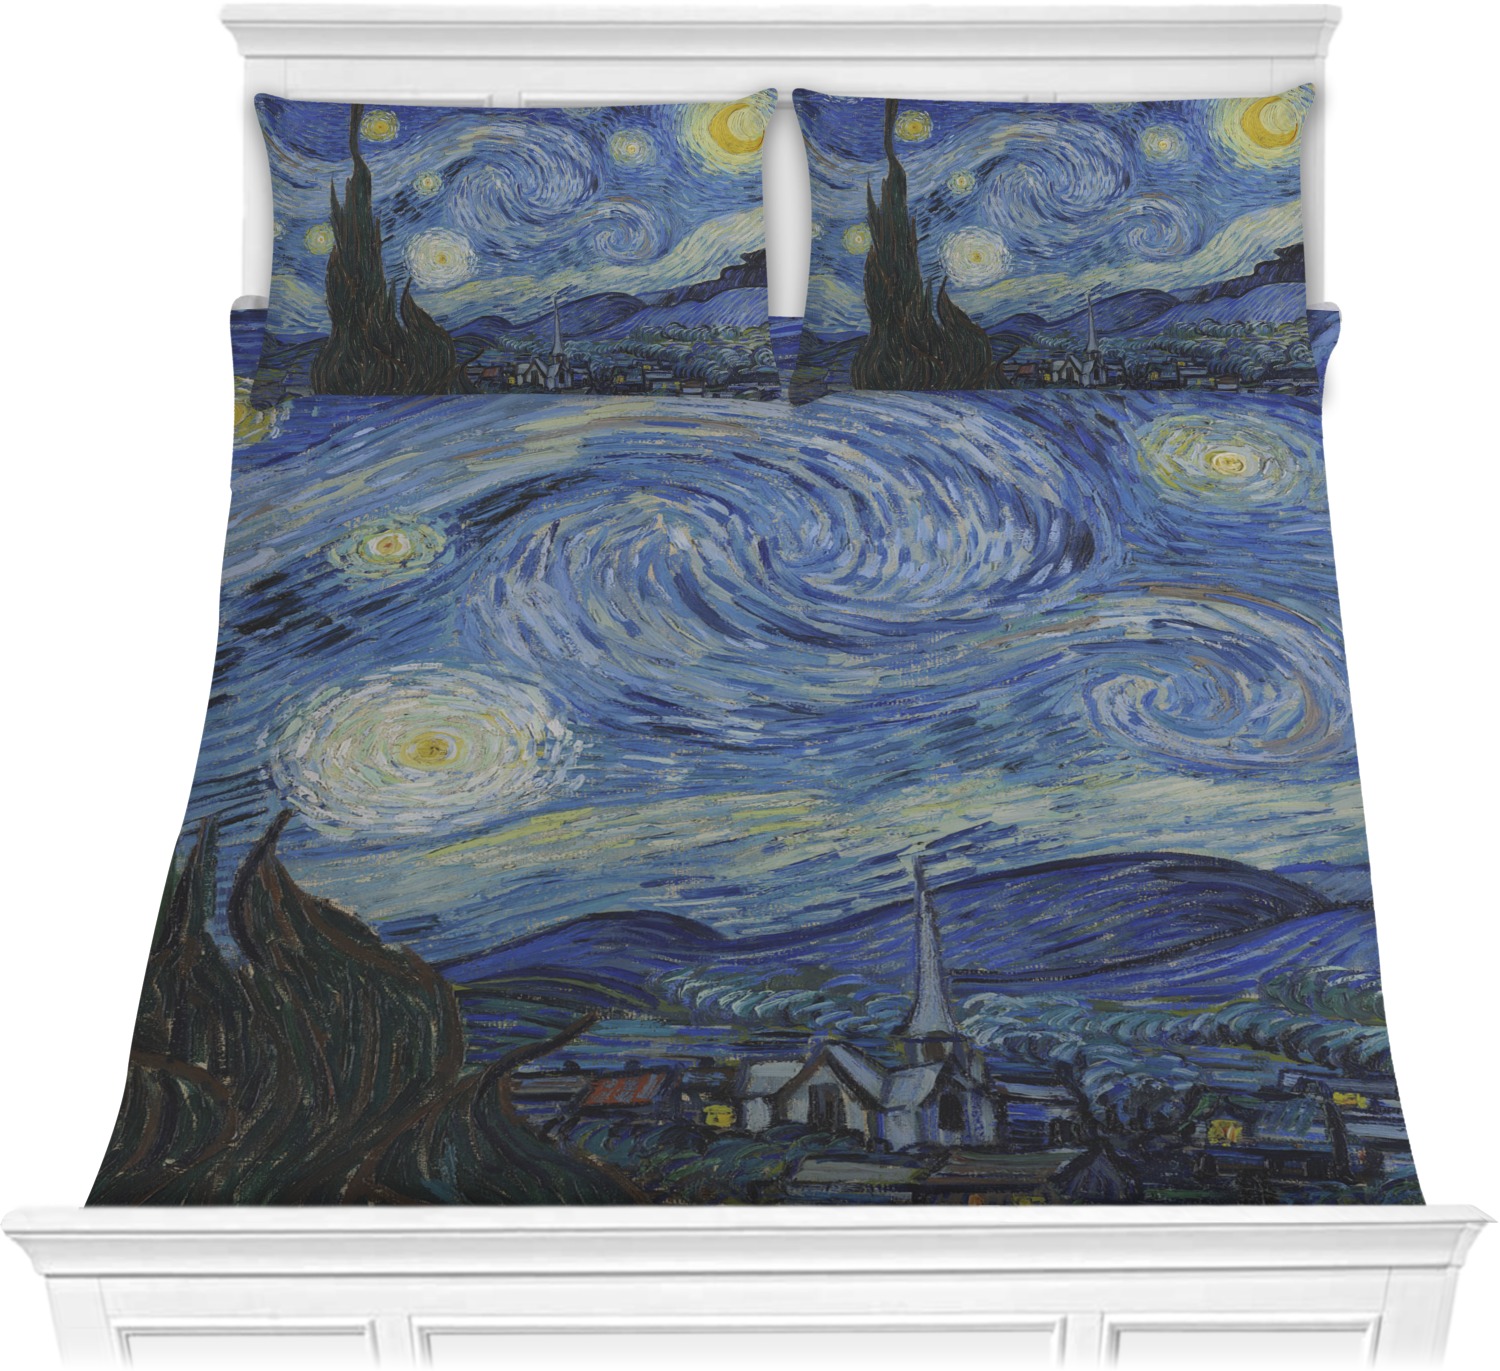 Roostery Pillow Sham 100% Cotton Sateen 30in x 24in Flange Sham Starry Night Van Gogh Painting Star Sky Fine Art Famous Print 